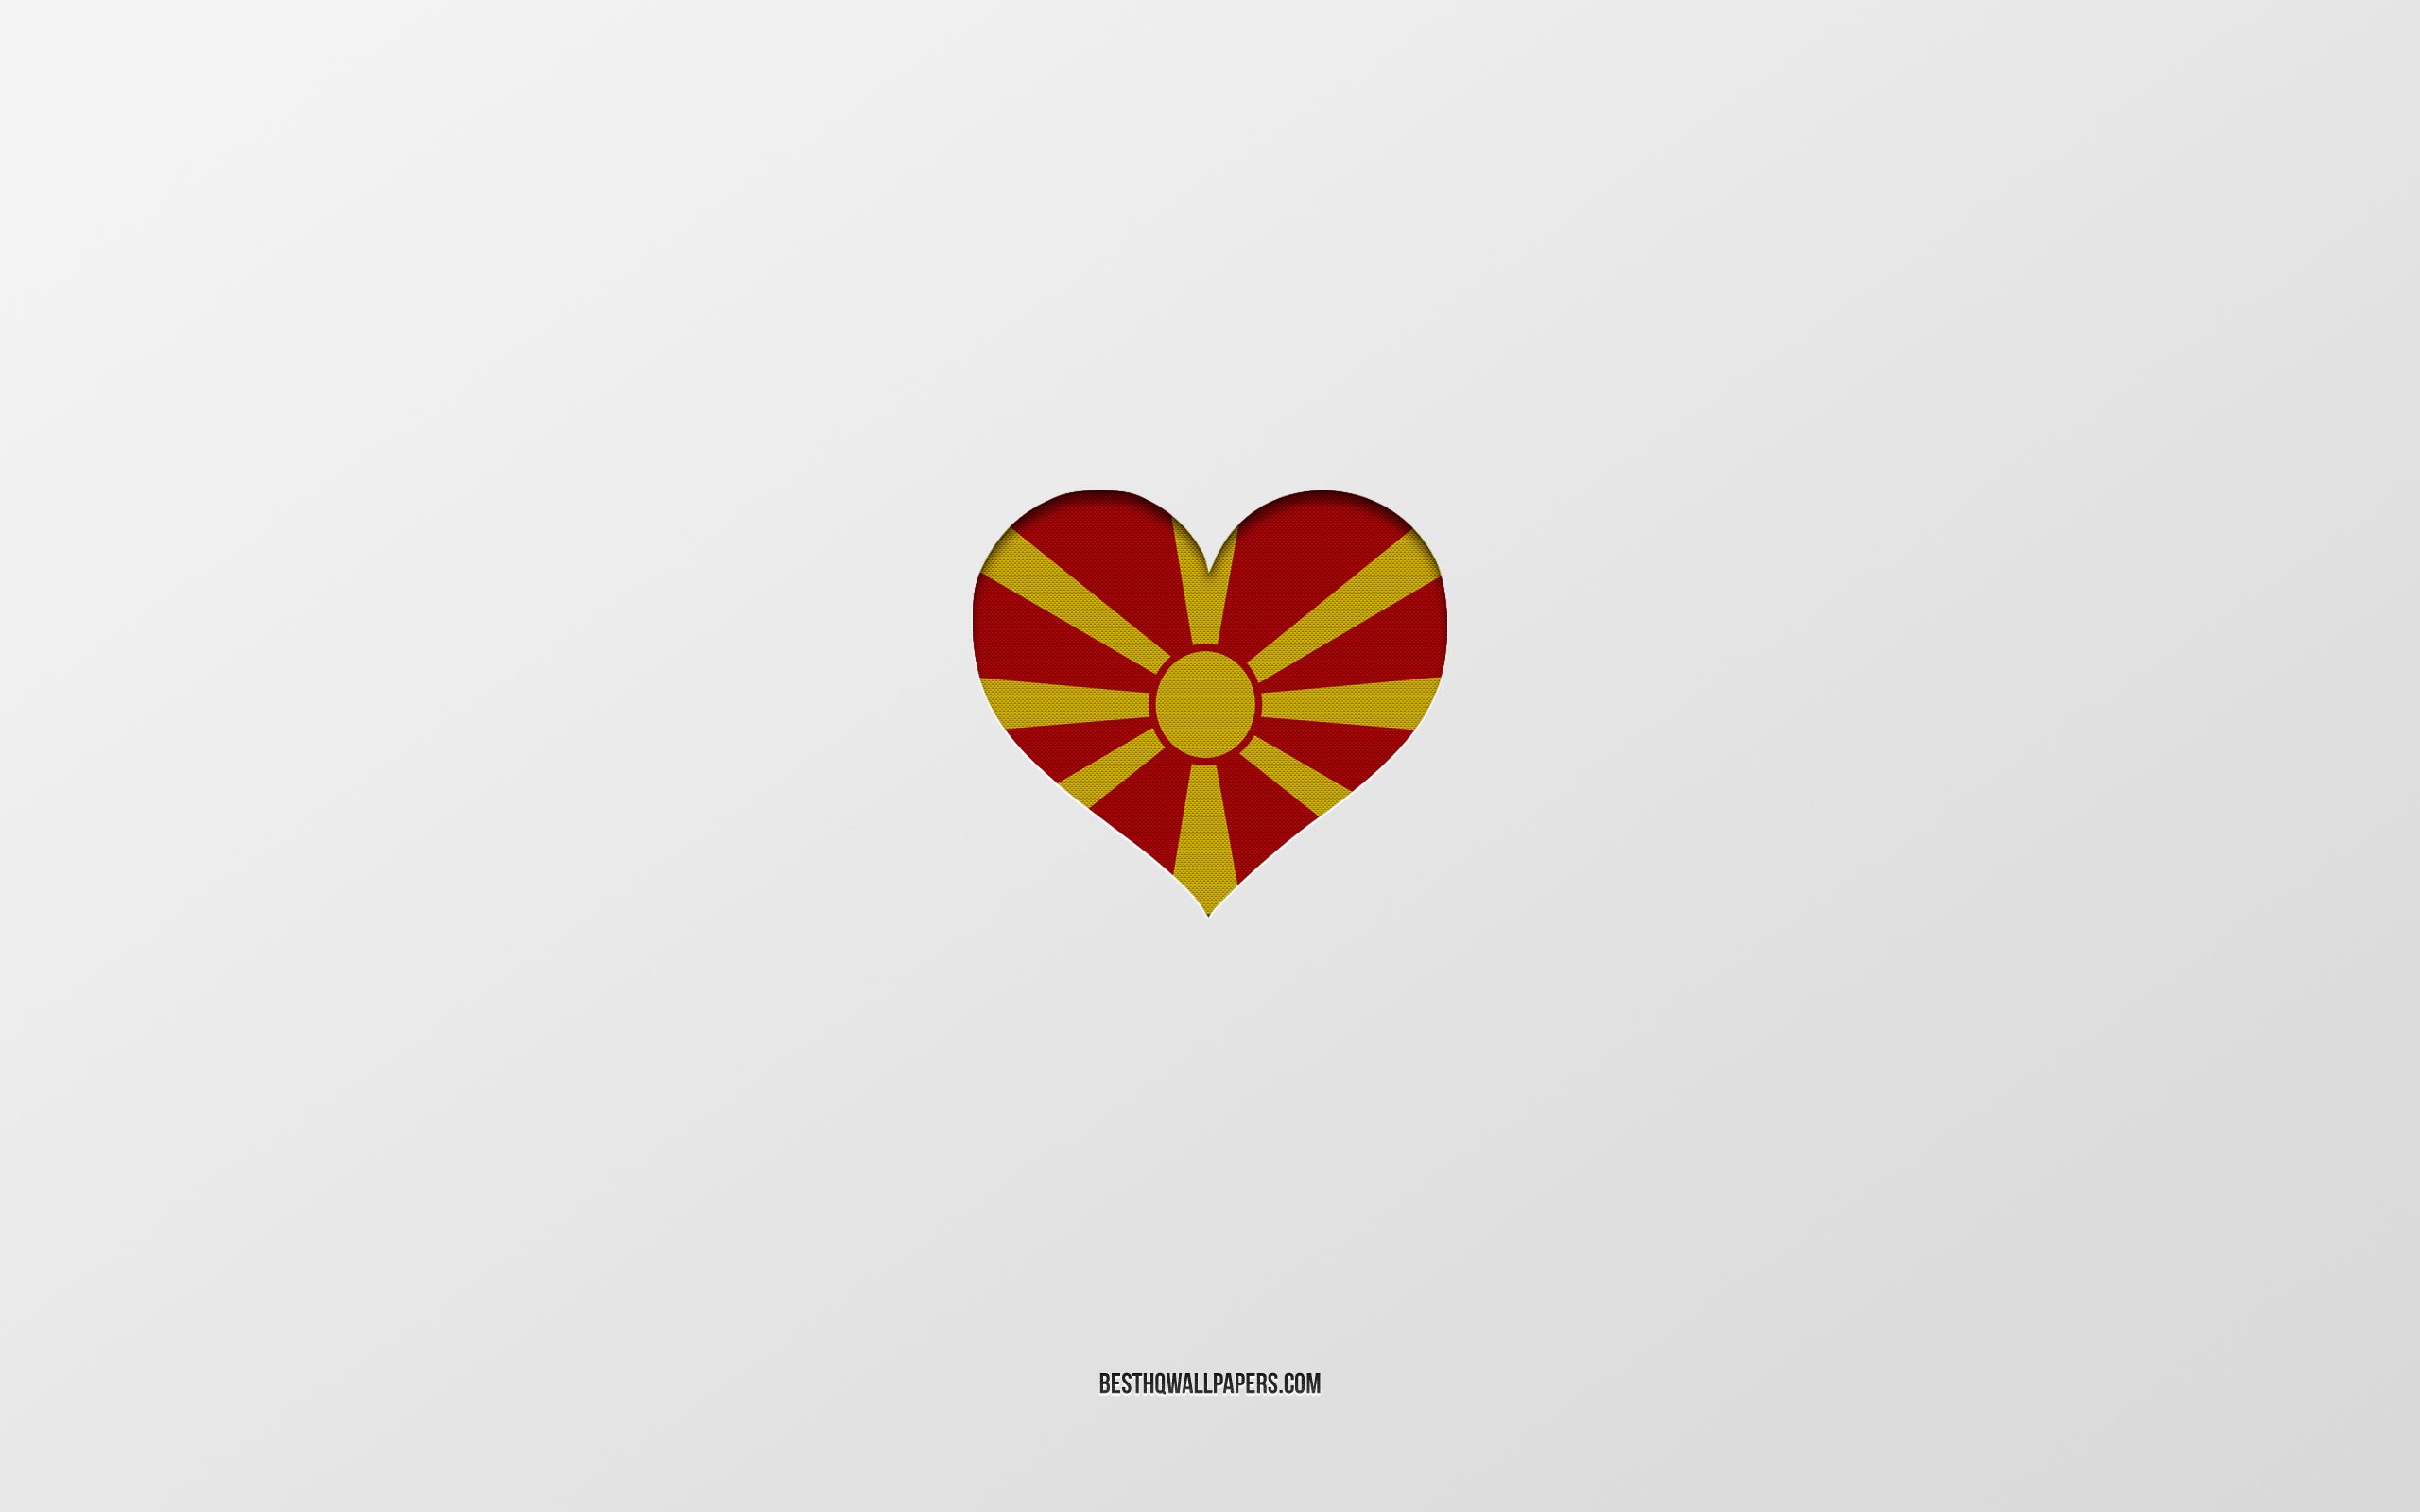 Download wallpaper I Love North Macedonia, European countries, North Macedonia, gray background, North Macedonia flag heart, favorite country, Love North Macedonia for desktop with resolution 2560x1600. High Quality HD picture wallpaper